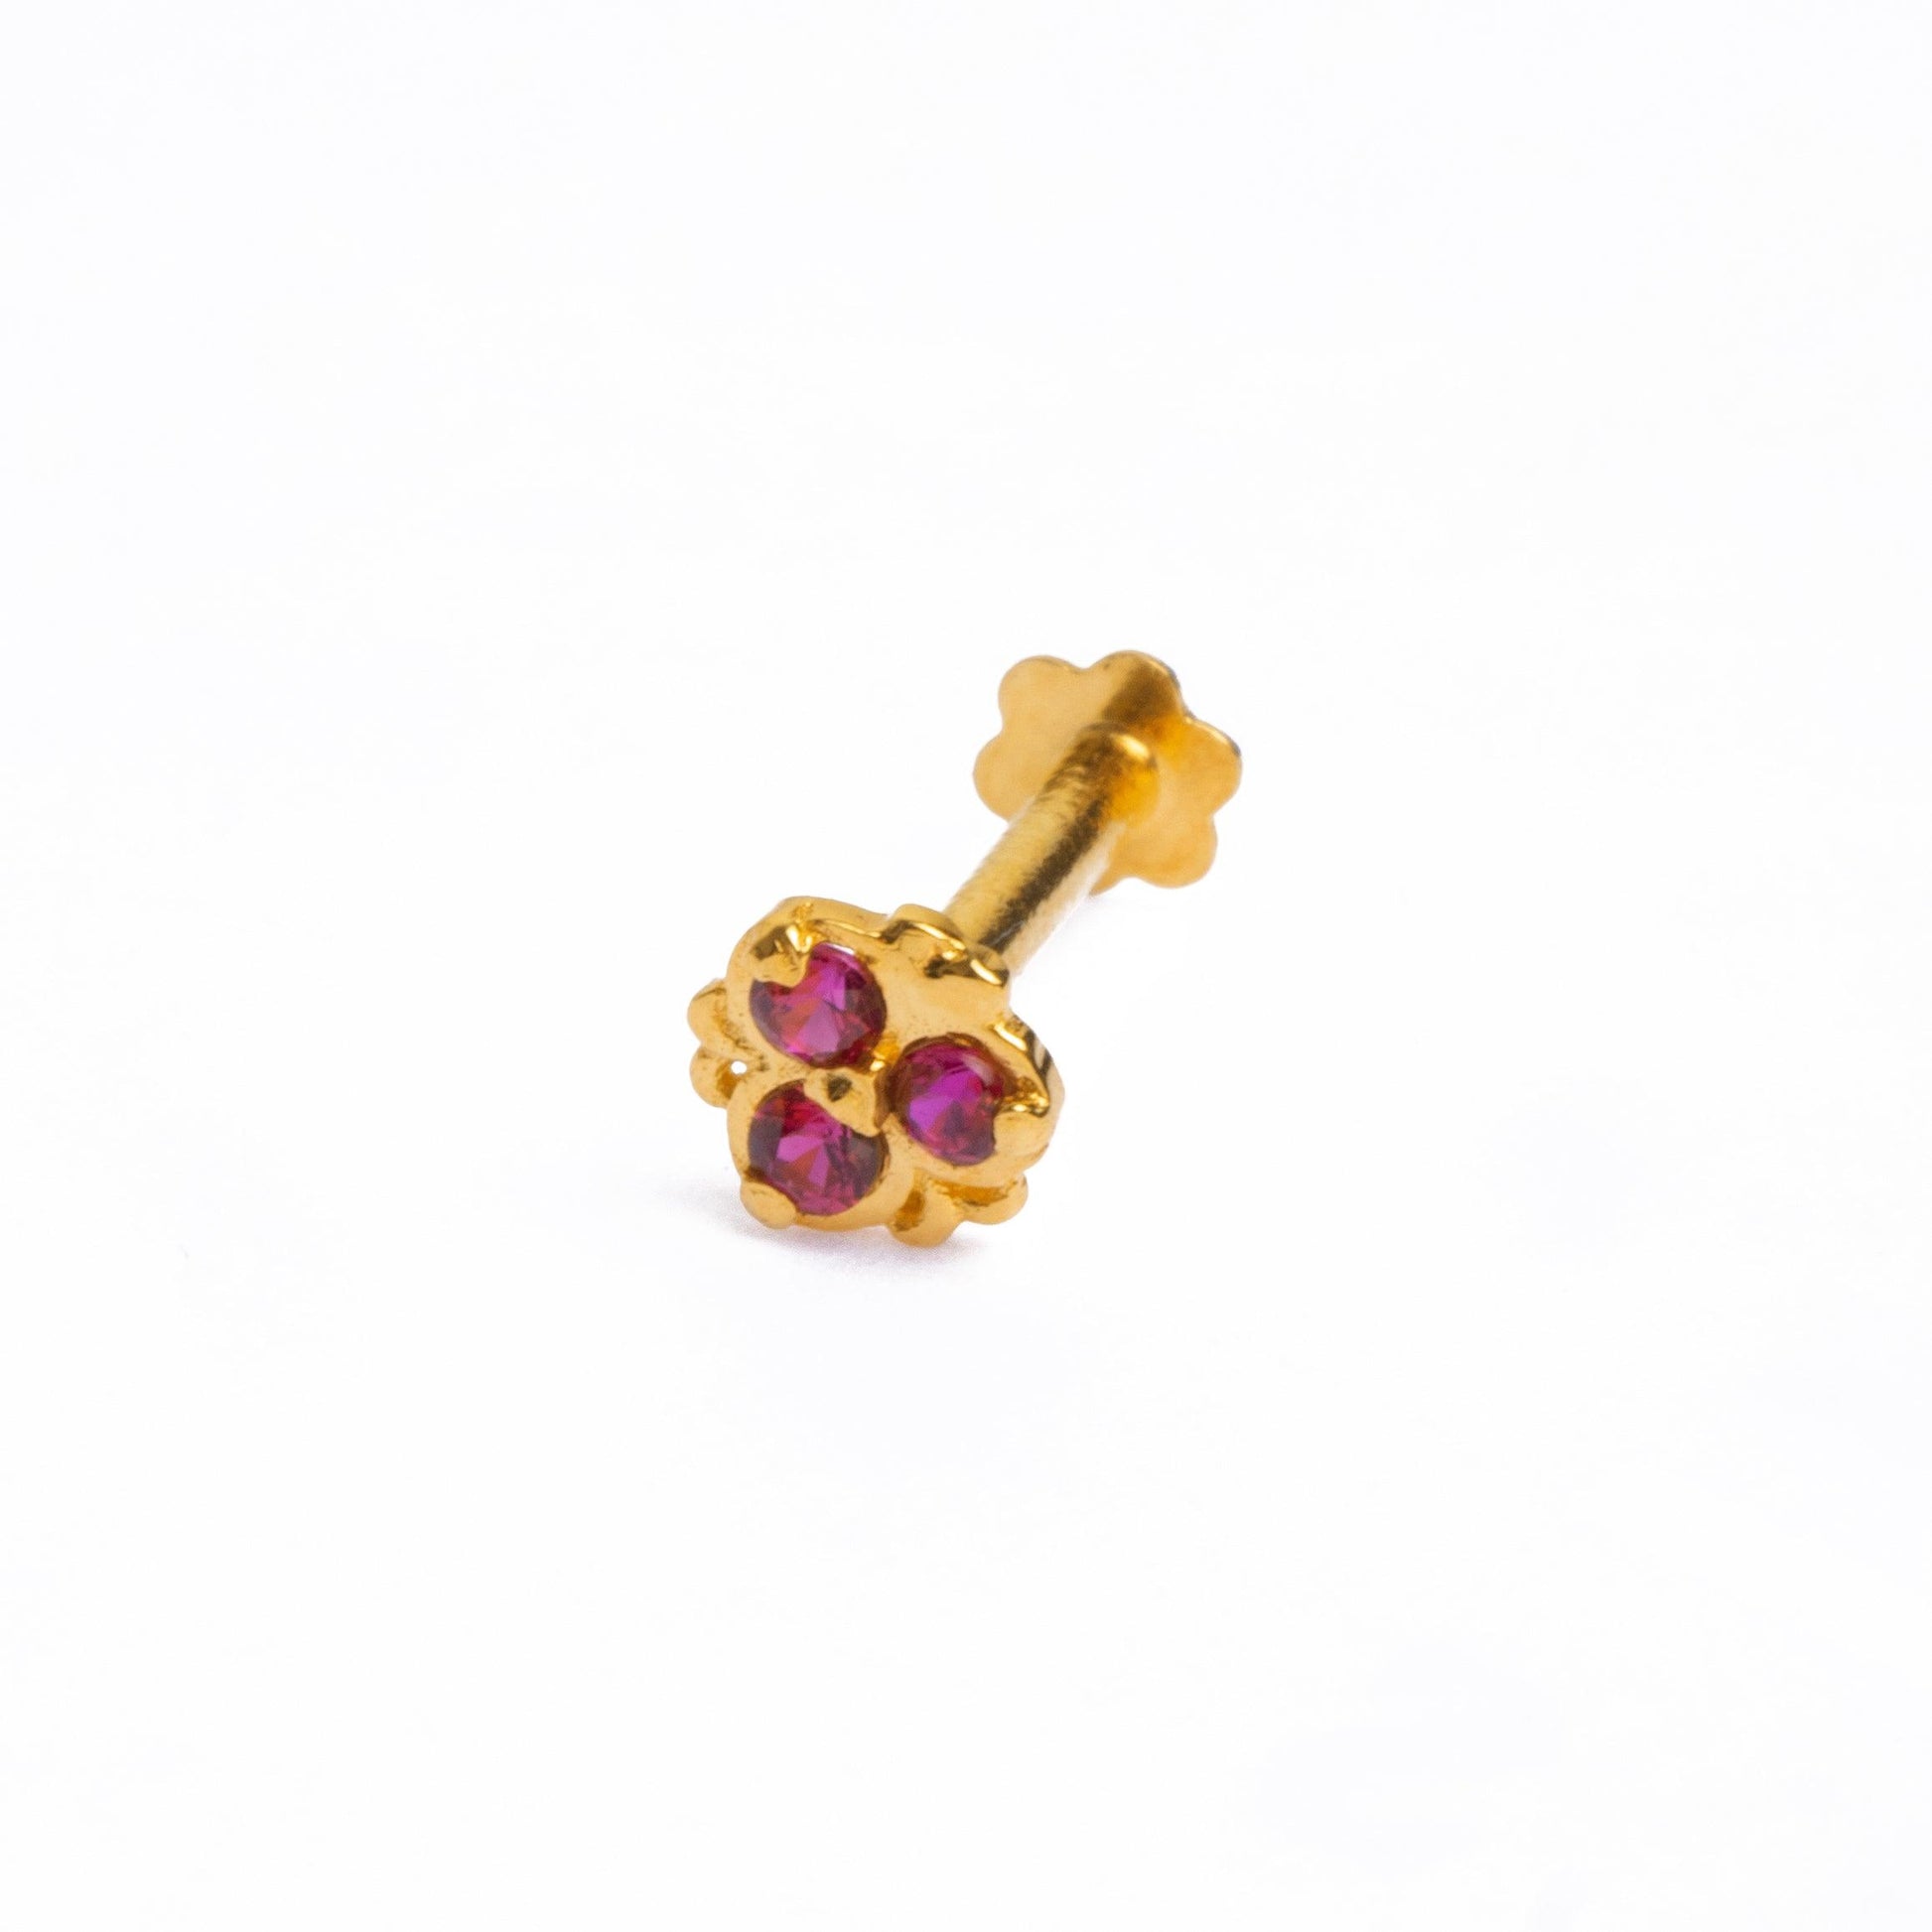 18ct Yellow Gold Nose Stud set with pink cubic zirconia stones NS-4792 - Minar Jewellers